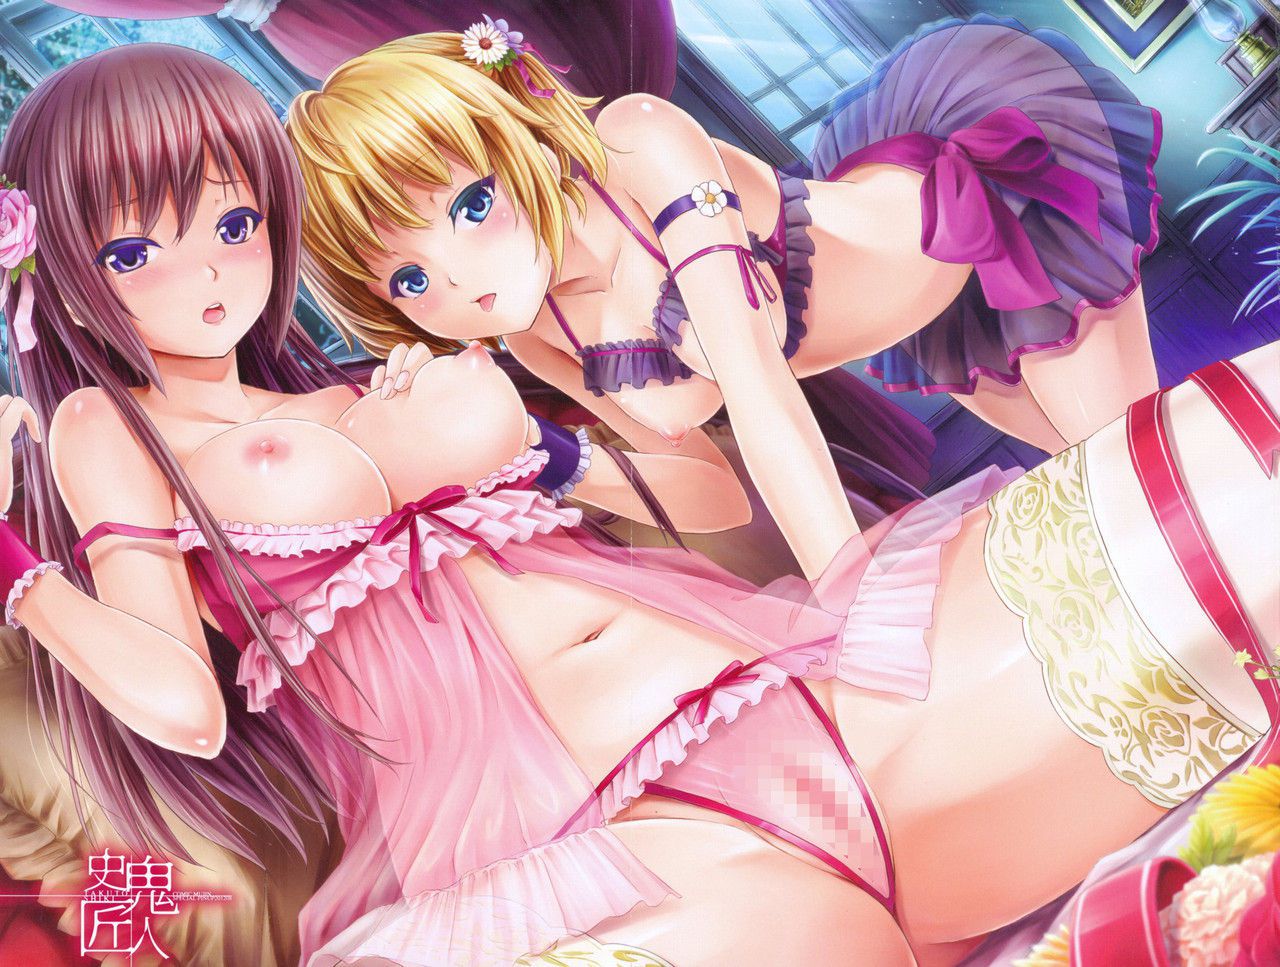 [Secondary image] eroticism and cute underwear that is unusual 3